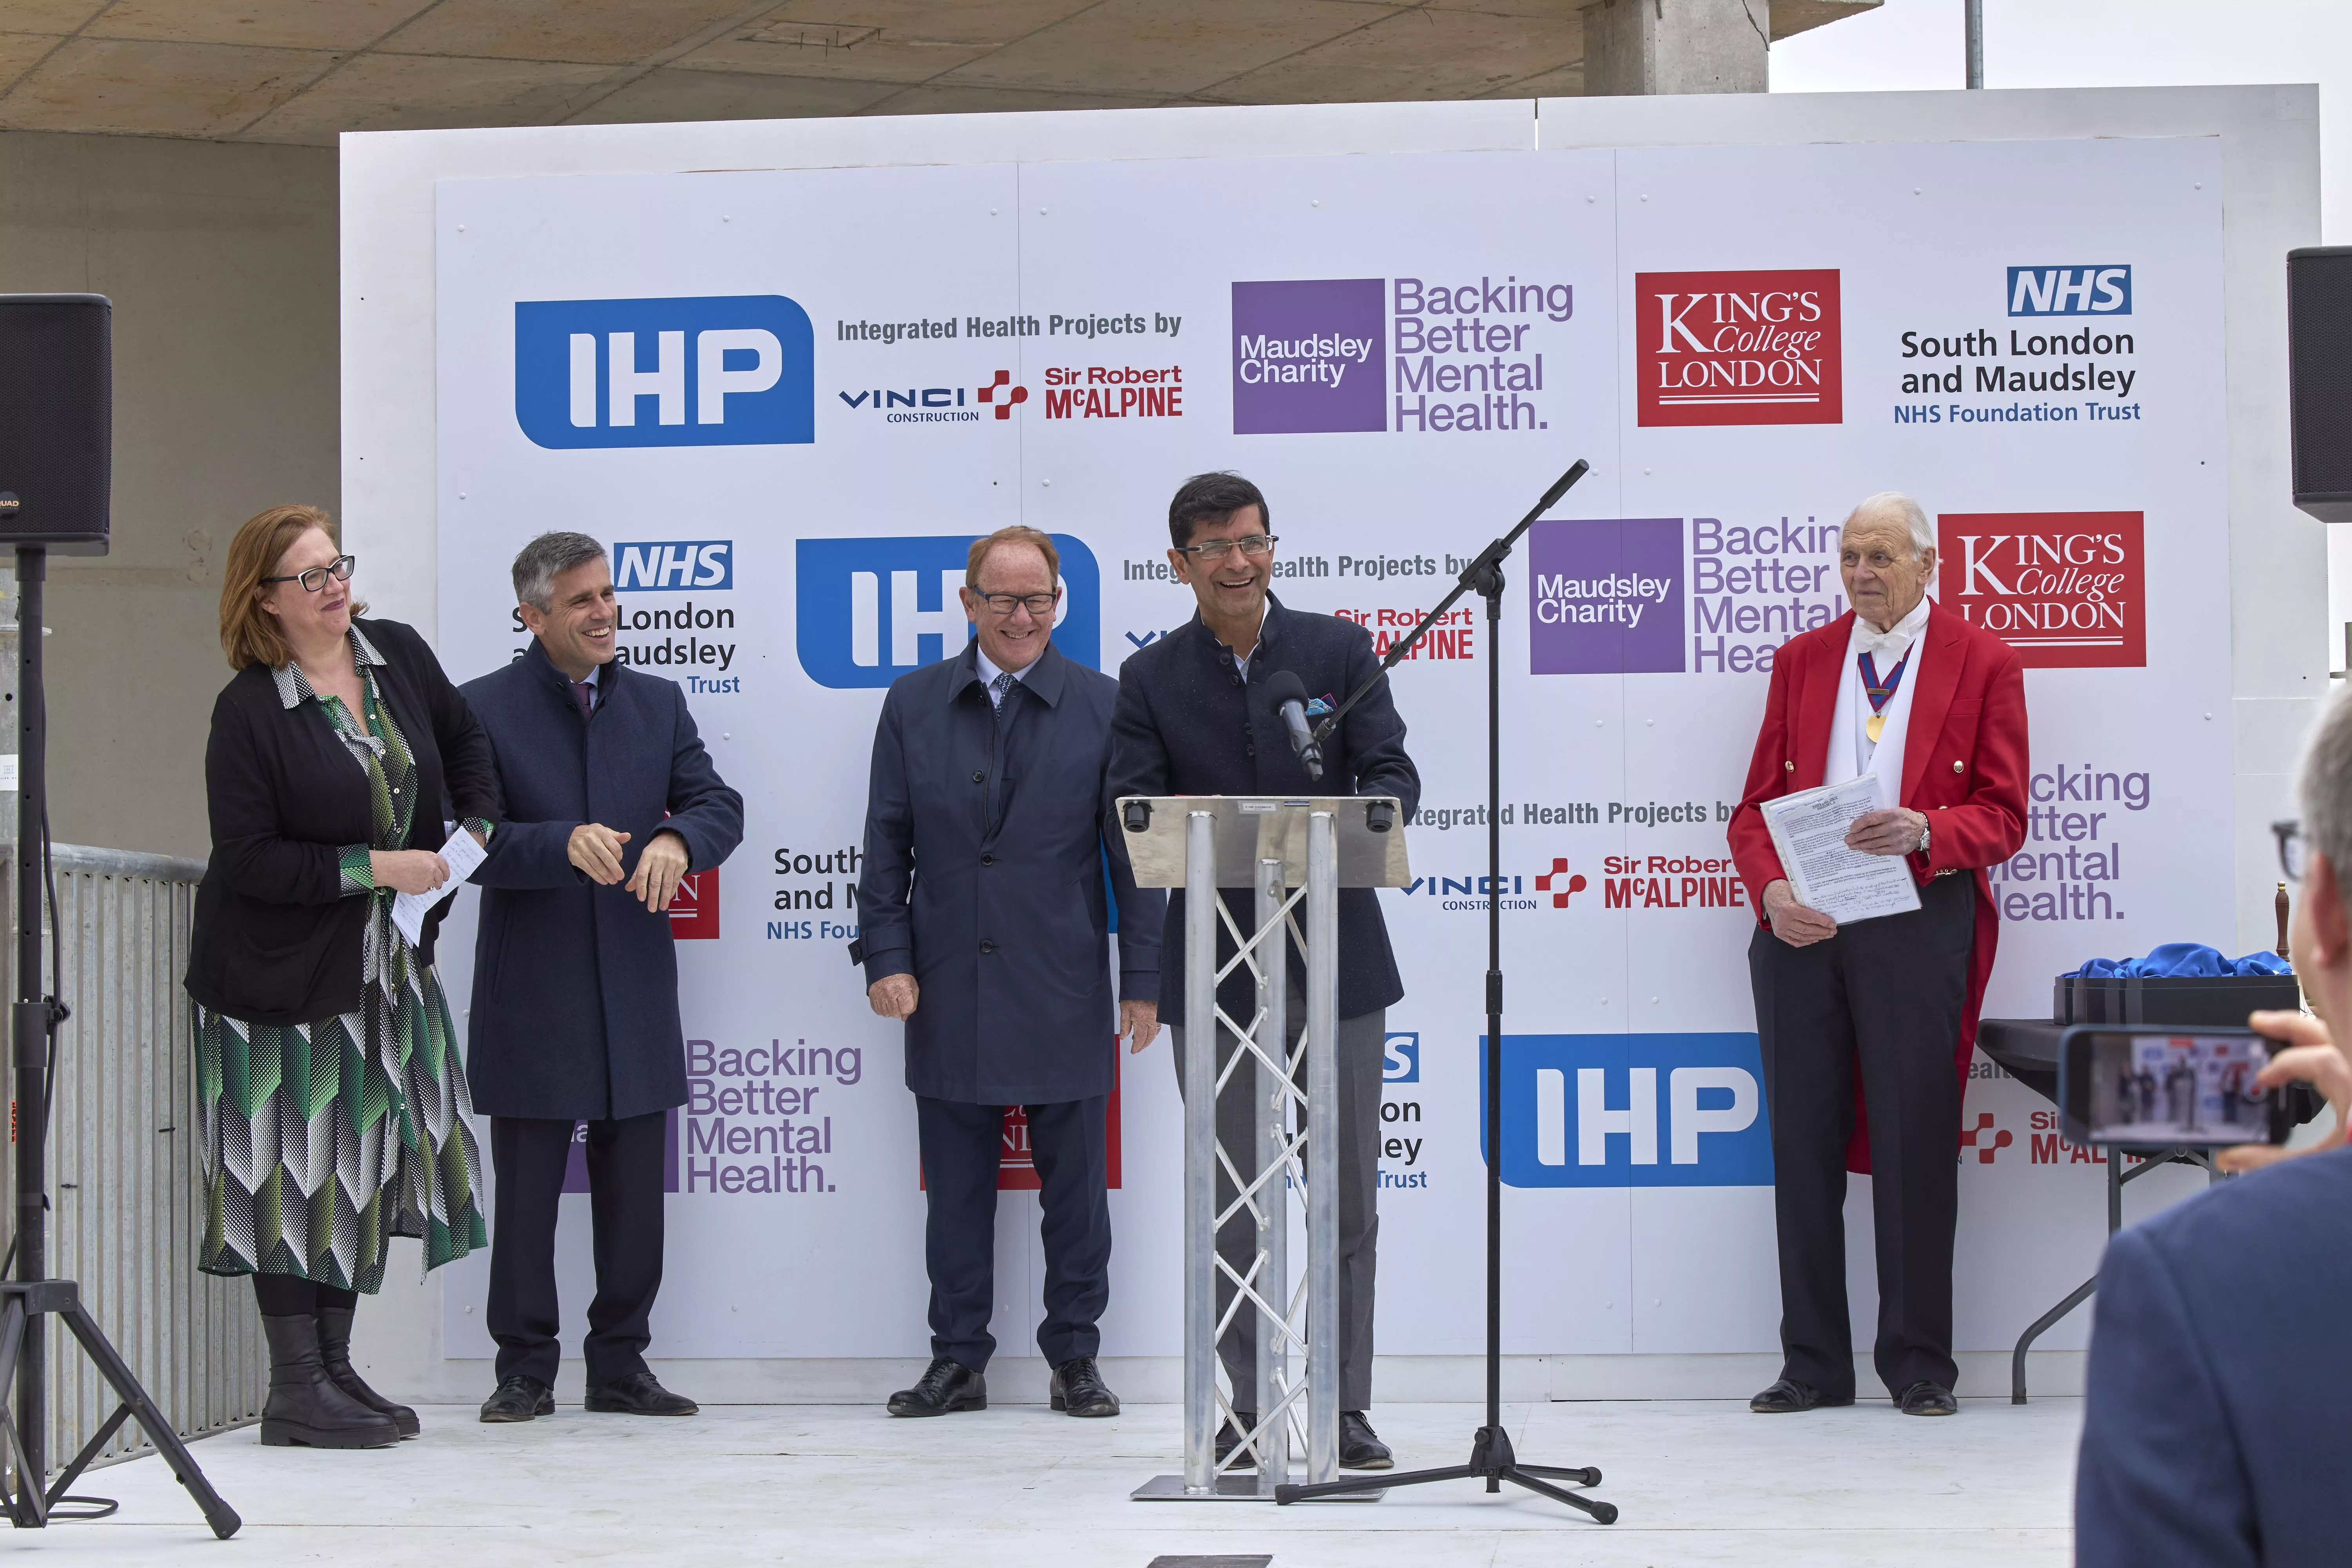 Professor Shitij Kapur, President & Principal of King's College London, spoke at the ceremony. (From left to right) Rebecca Gray,  Hector McAlpine, David Bradley, Professor Shitij Kapur, and the Master of Ceremonies.